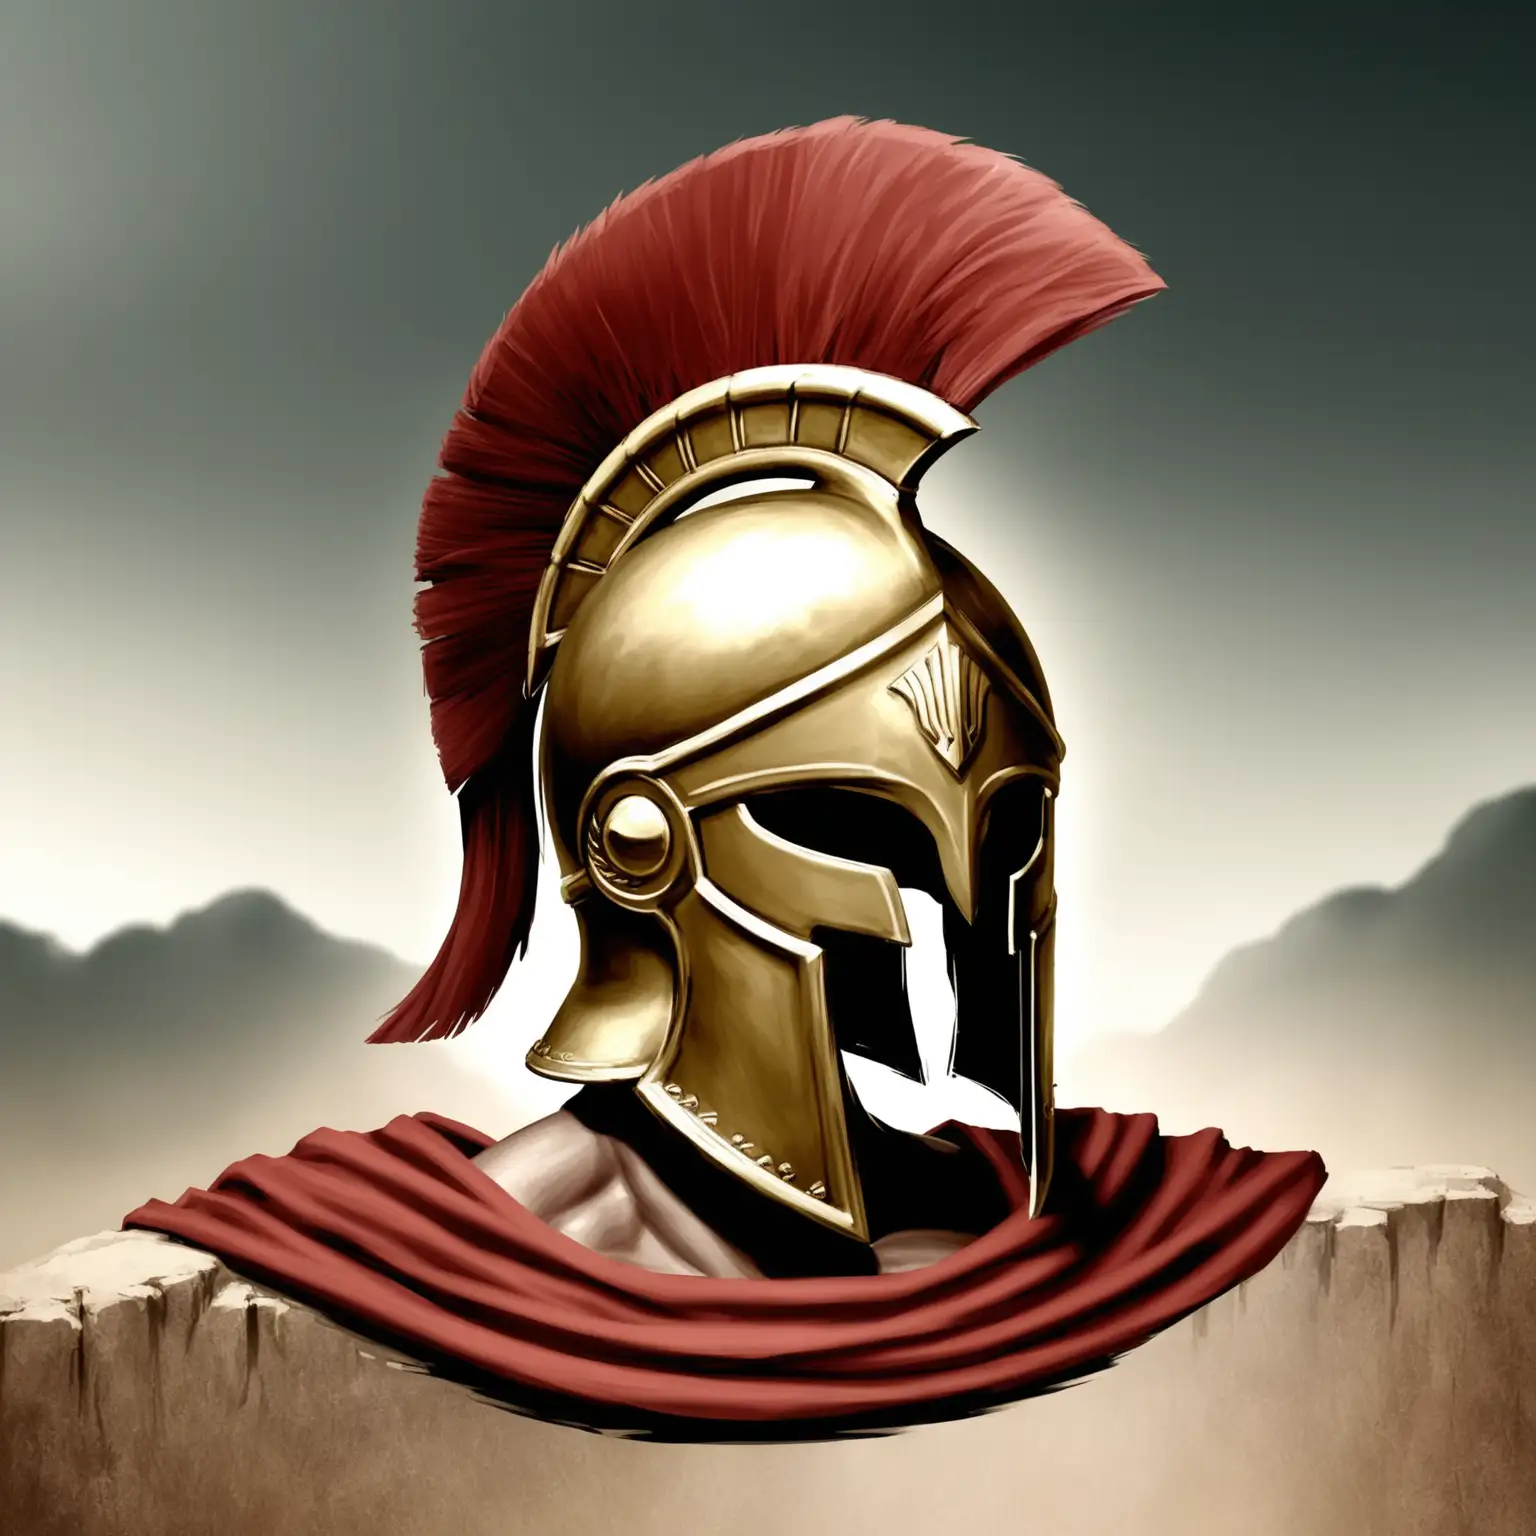 Spartan Warrior Helmet with Feathers in Historic Setting